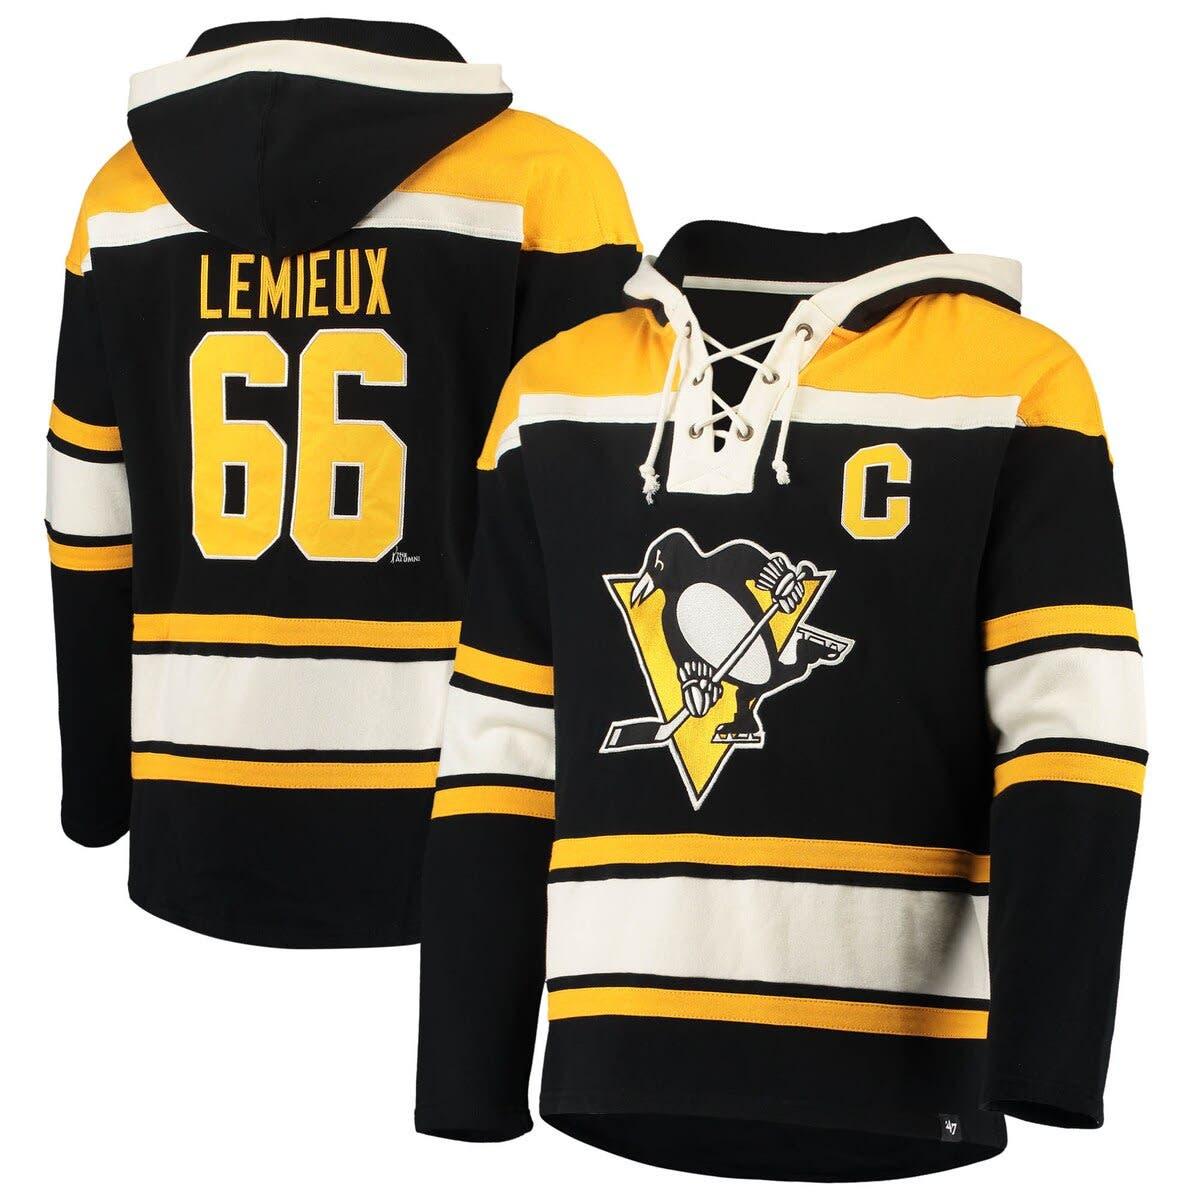 Women's '47 Black Pittsburgh Penguins Superior Lacer Pullover Hoodie Size: Small